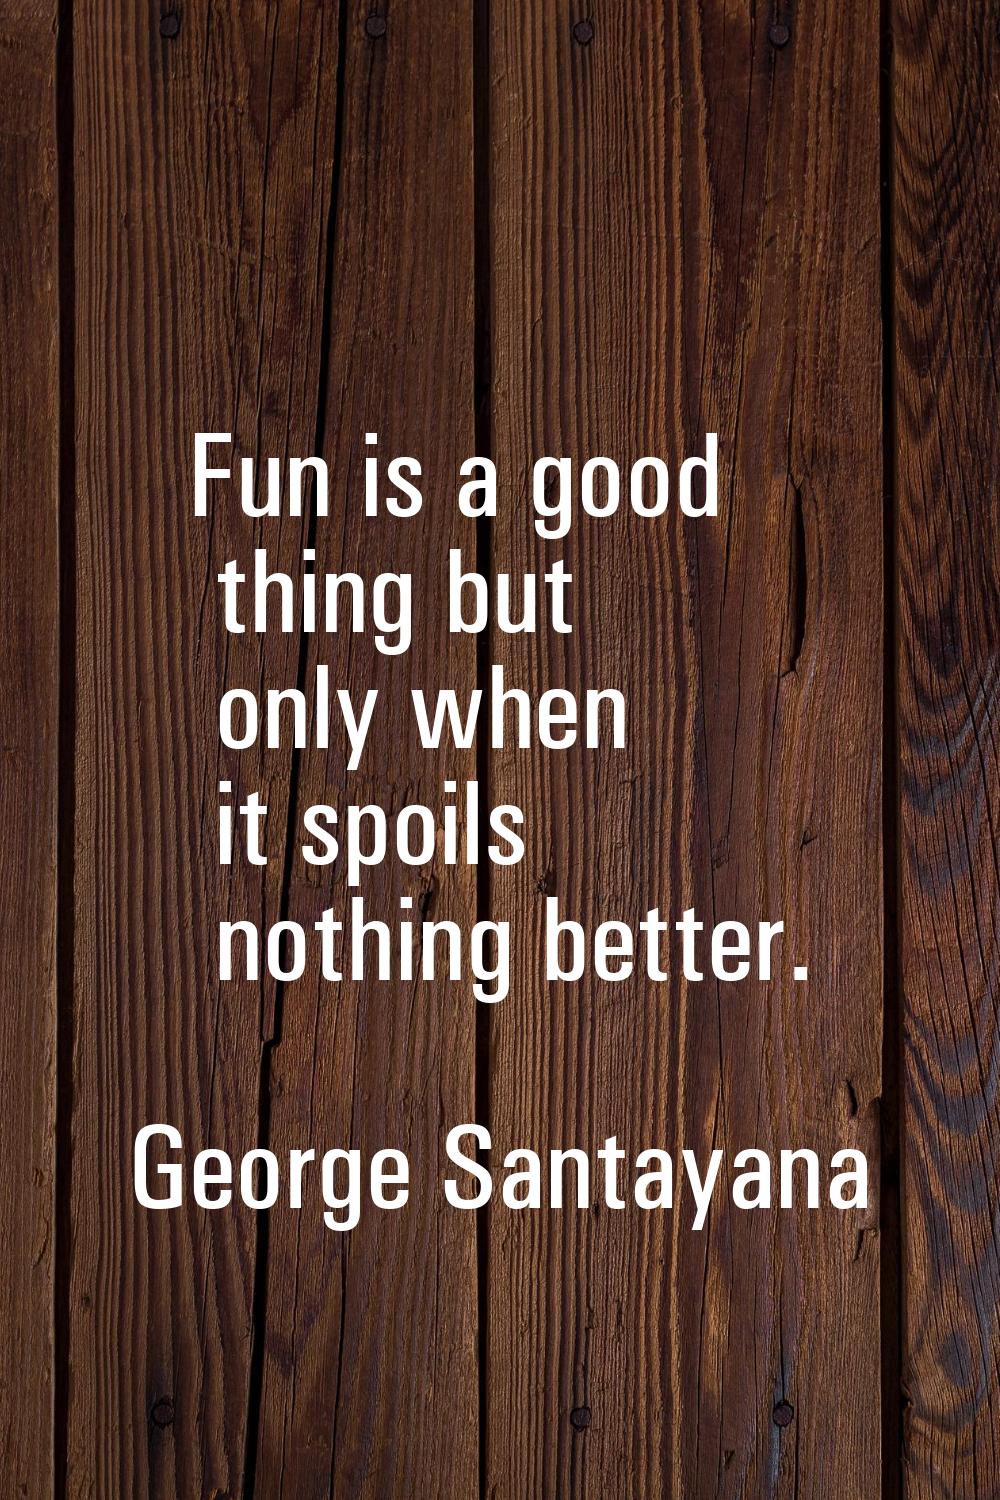 Fun is a good thing but only when it spoils nothing better.